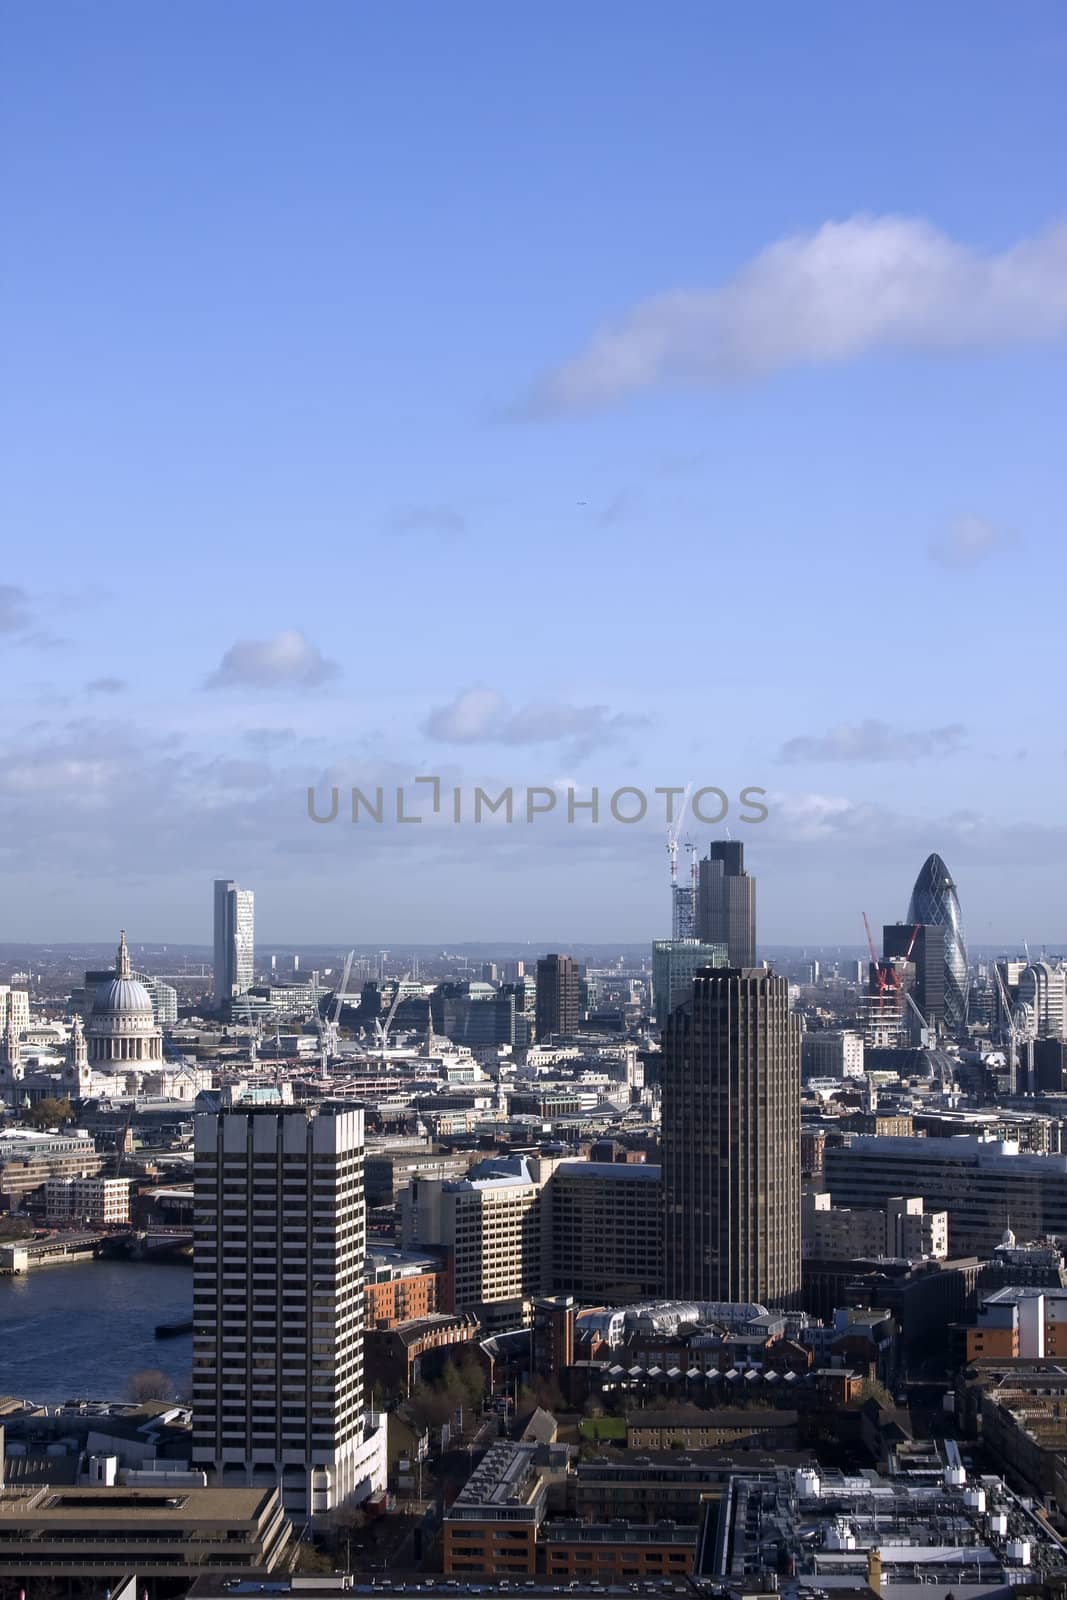 An aerial view of London showing St Paul's Cathedral, the Natwest Tower and the Gherkin